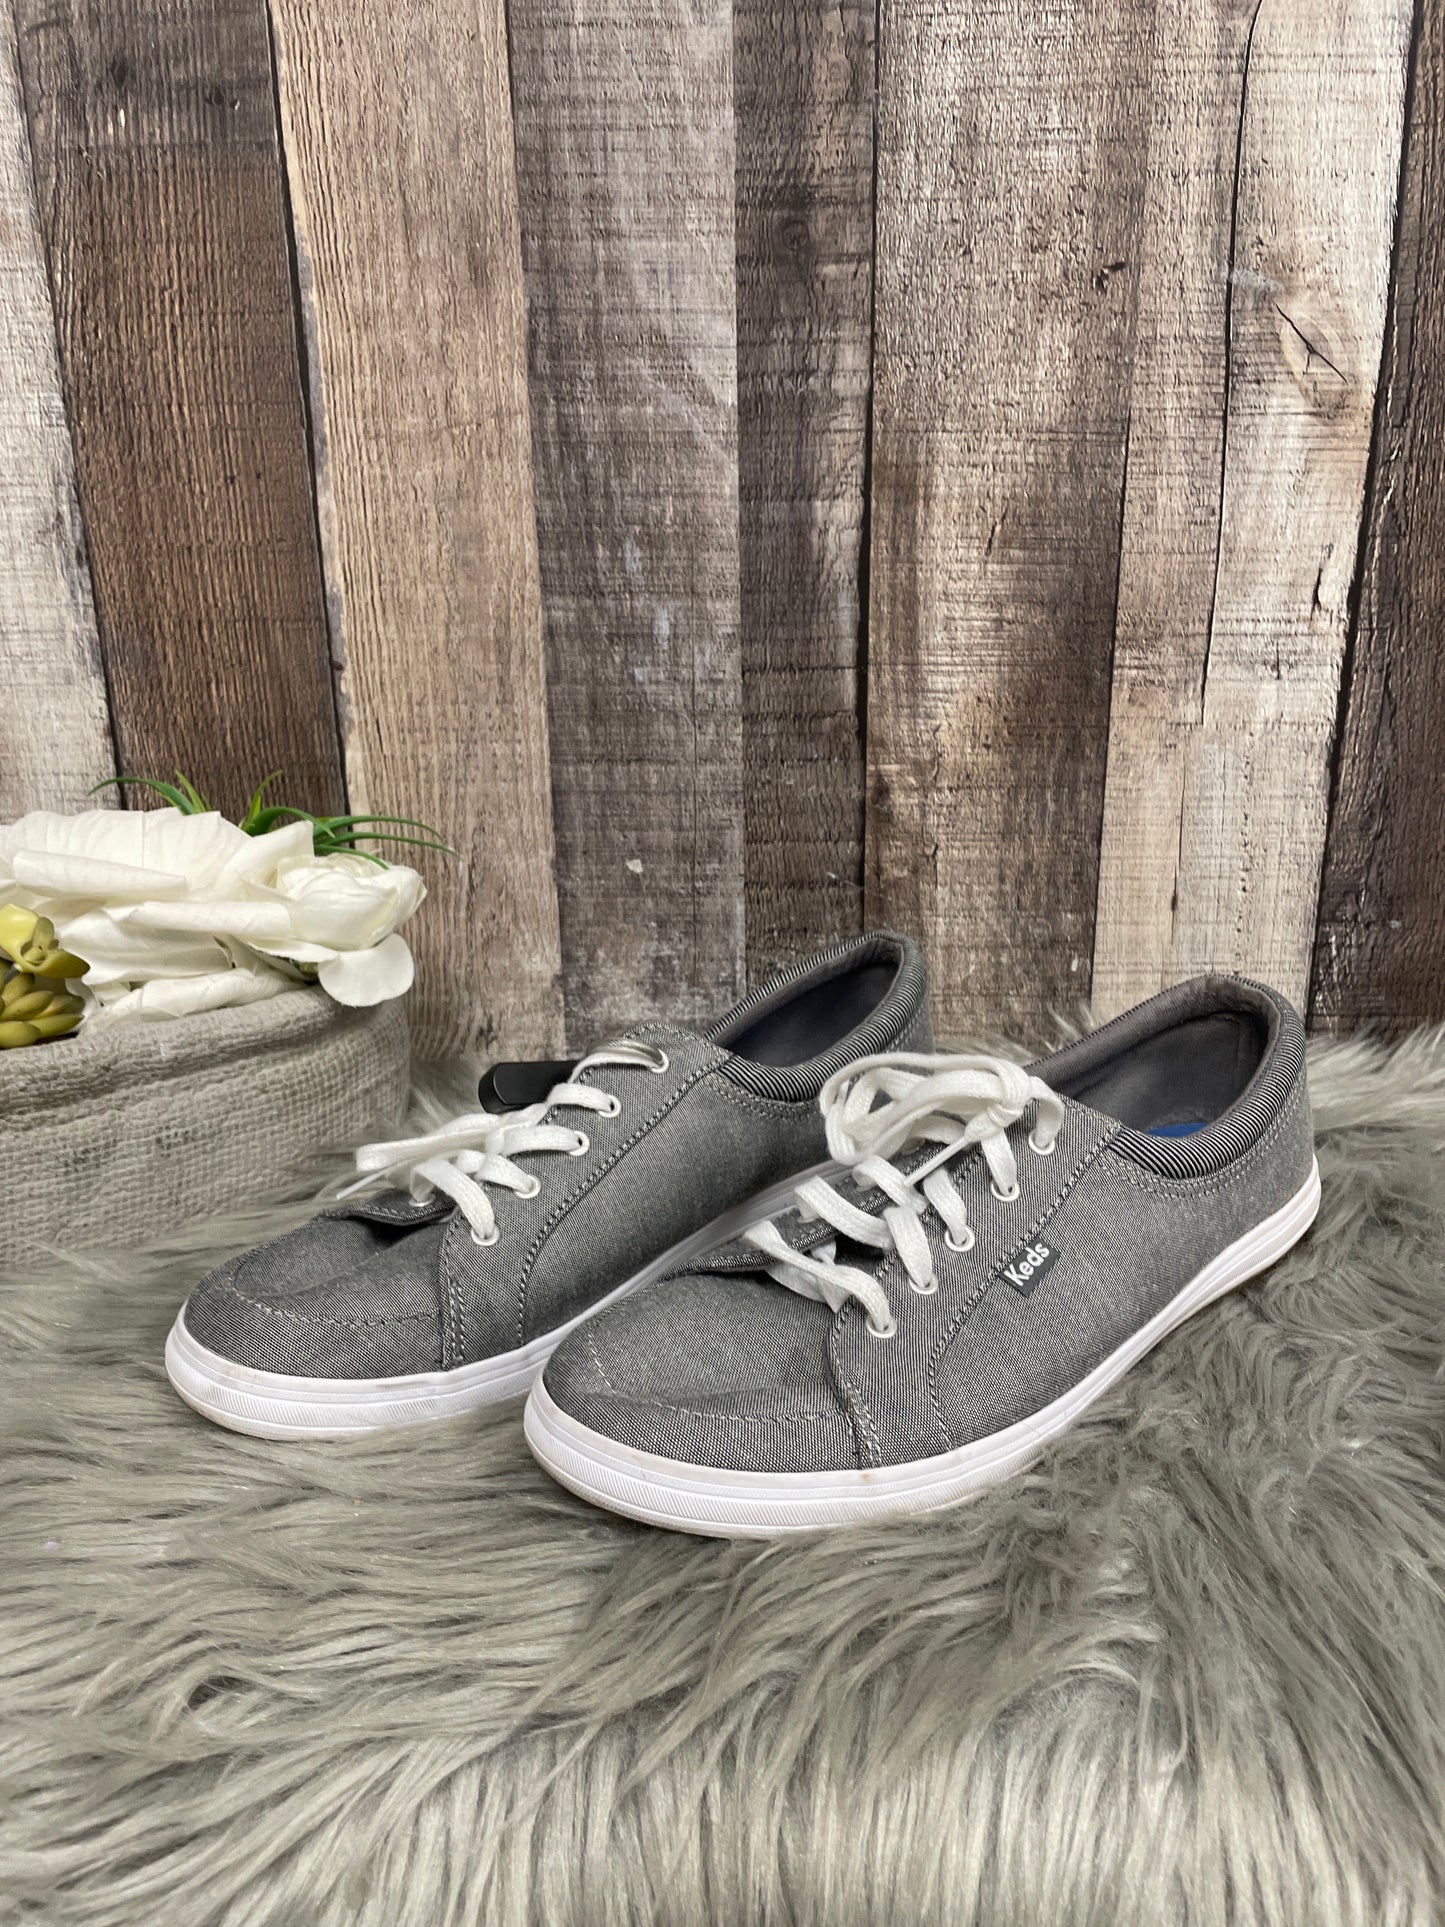 Grey & White Shoes Sneakers Keds, Size 8